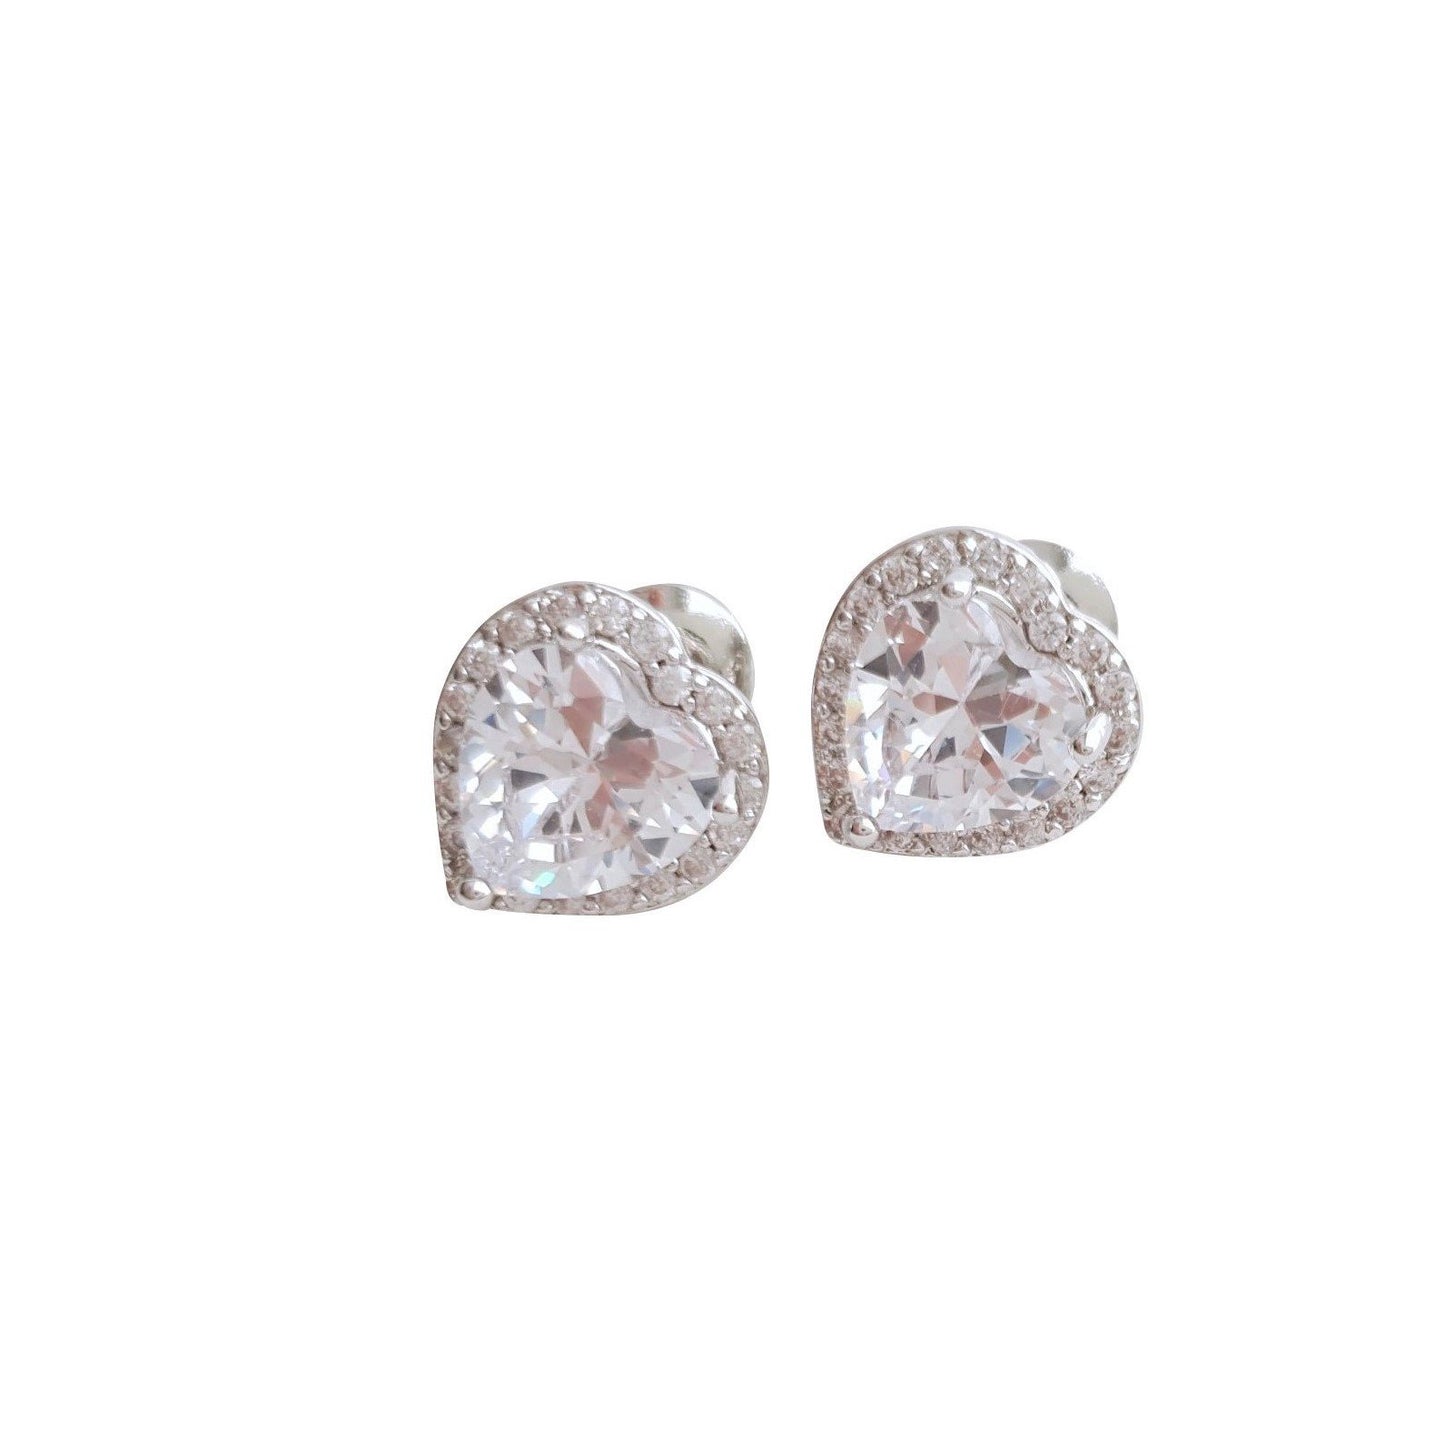 Silver heart earrings made of cubic zirconia for brides